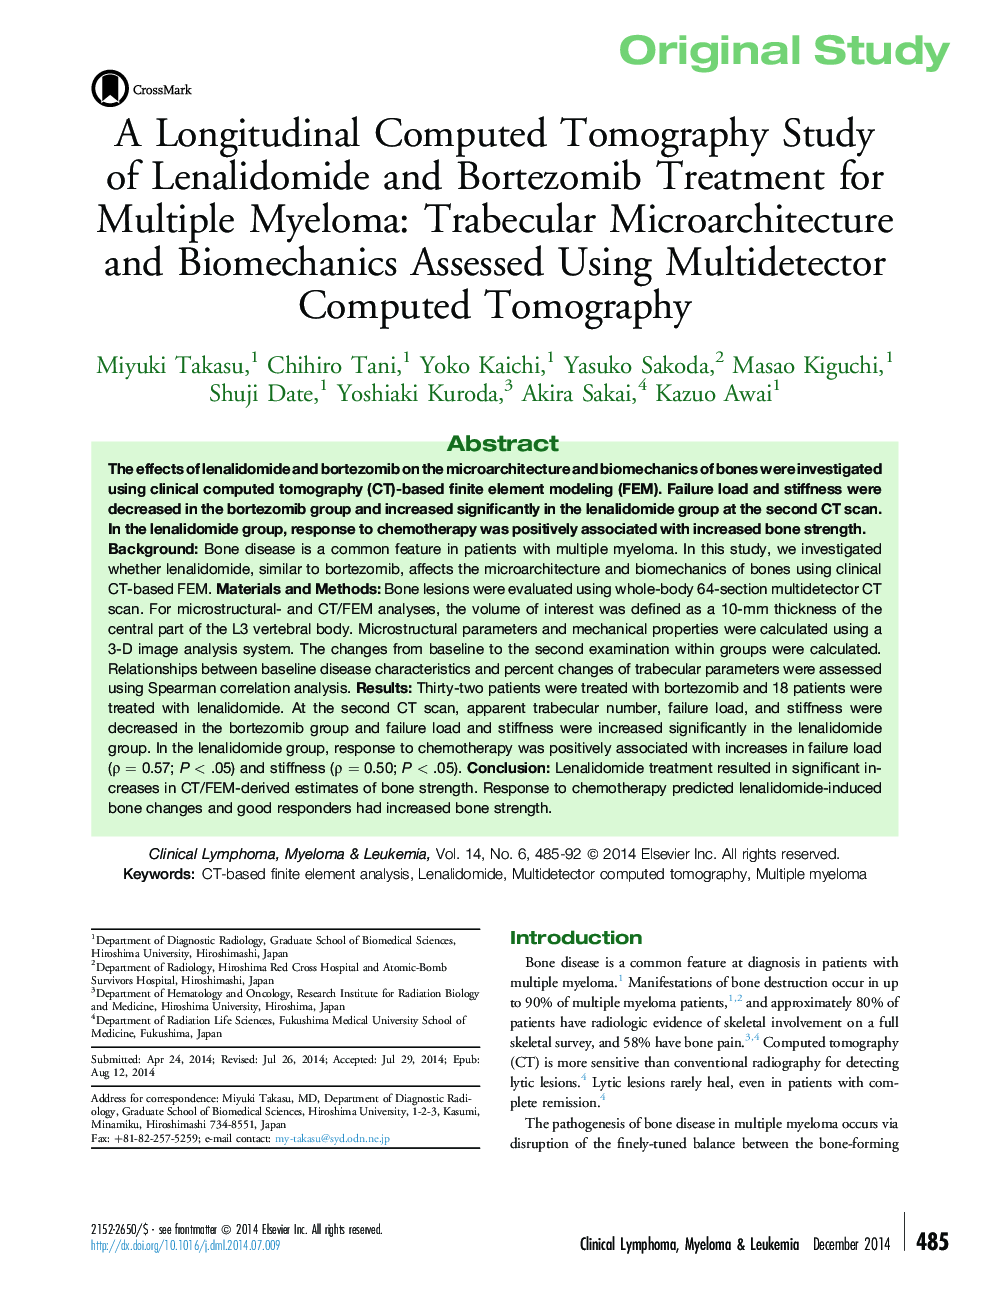 A Longitudinal Computed Tomography Study of Lenalidomide and Bortezomib Treatment for Multiple Myeloma: Trabecular Microarchitecture and Biomechanics Assessed Using Multidetector Computed Tomography